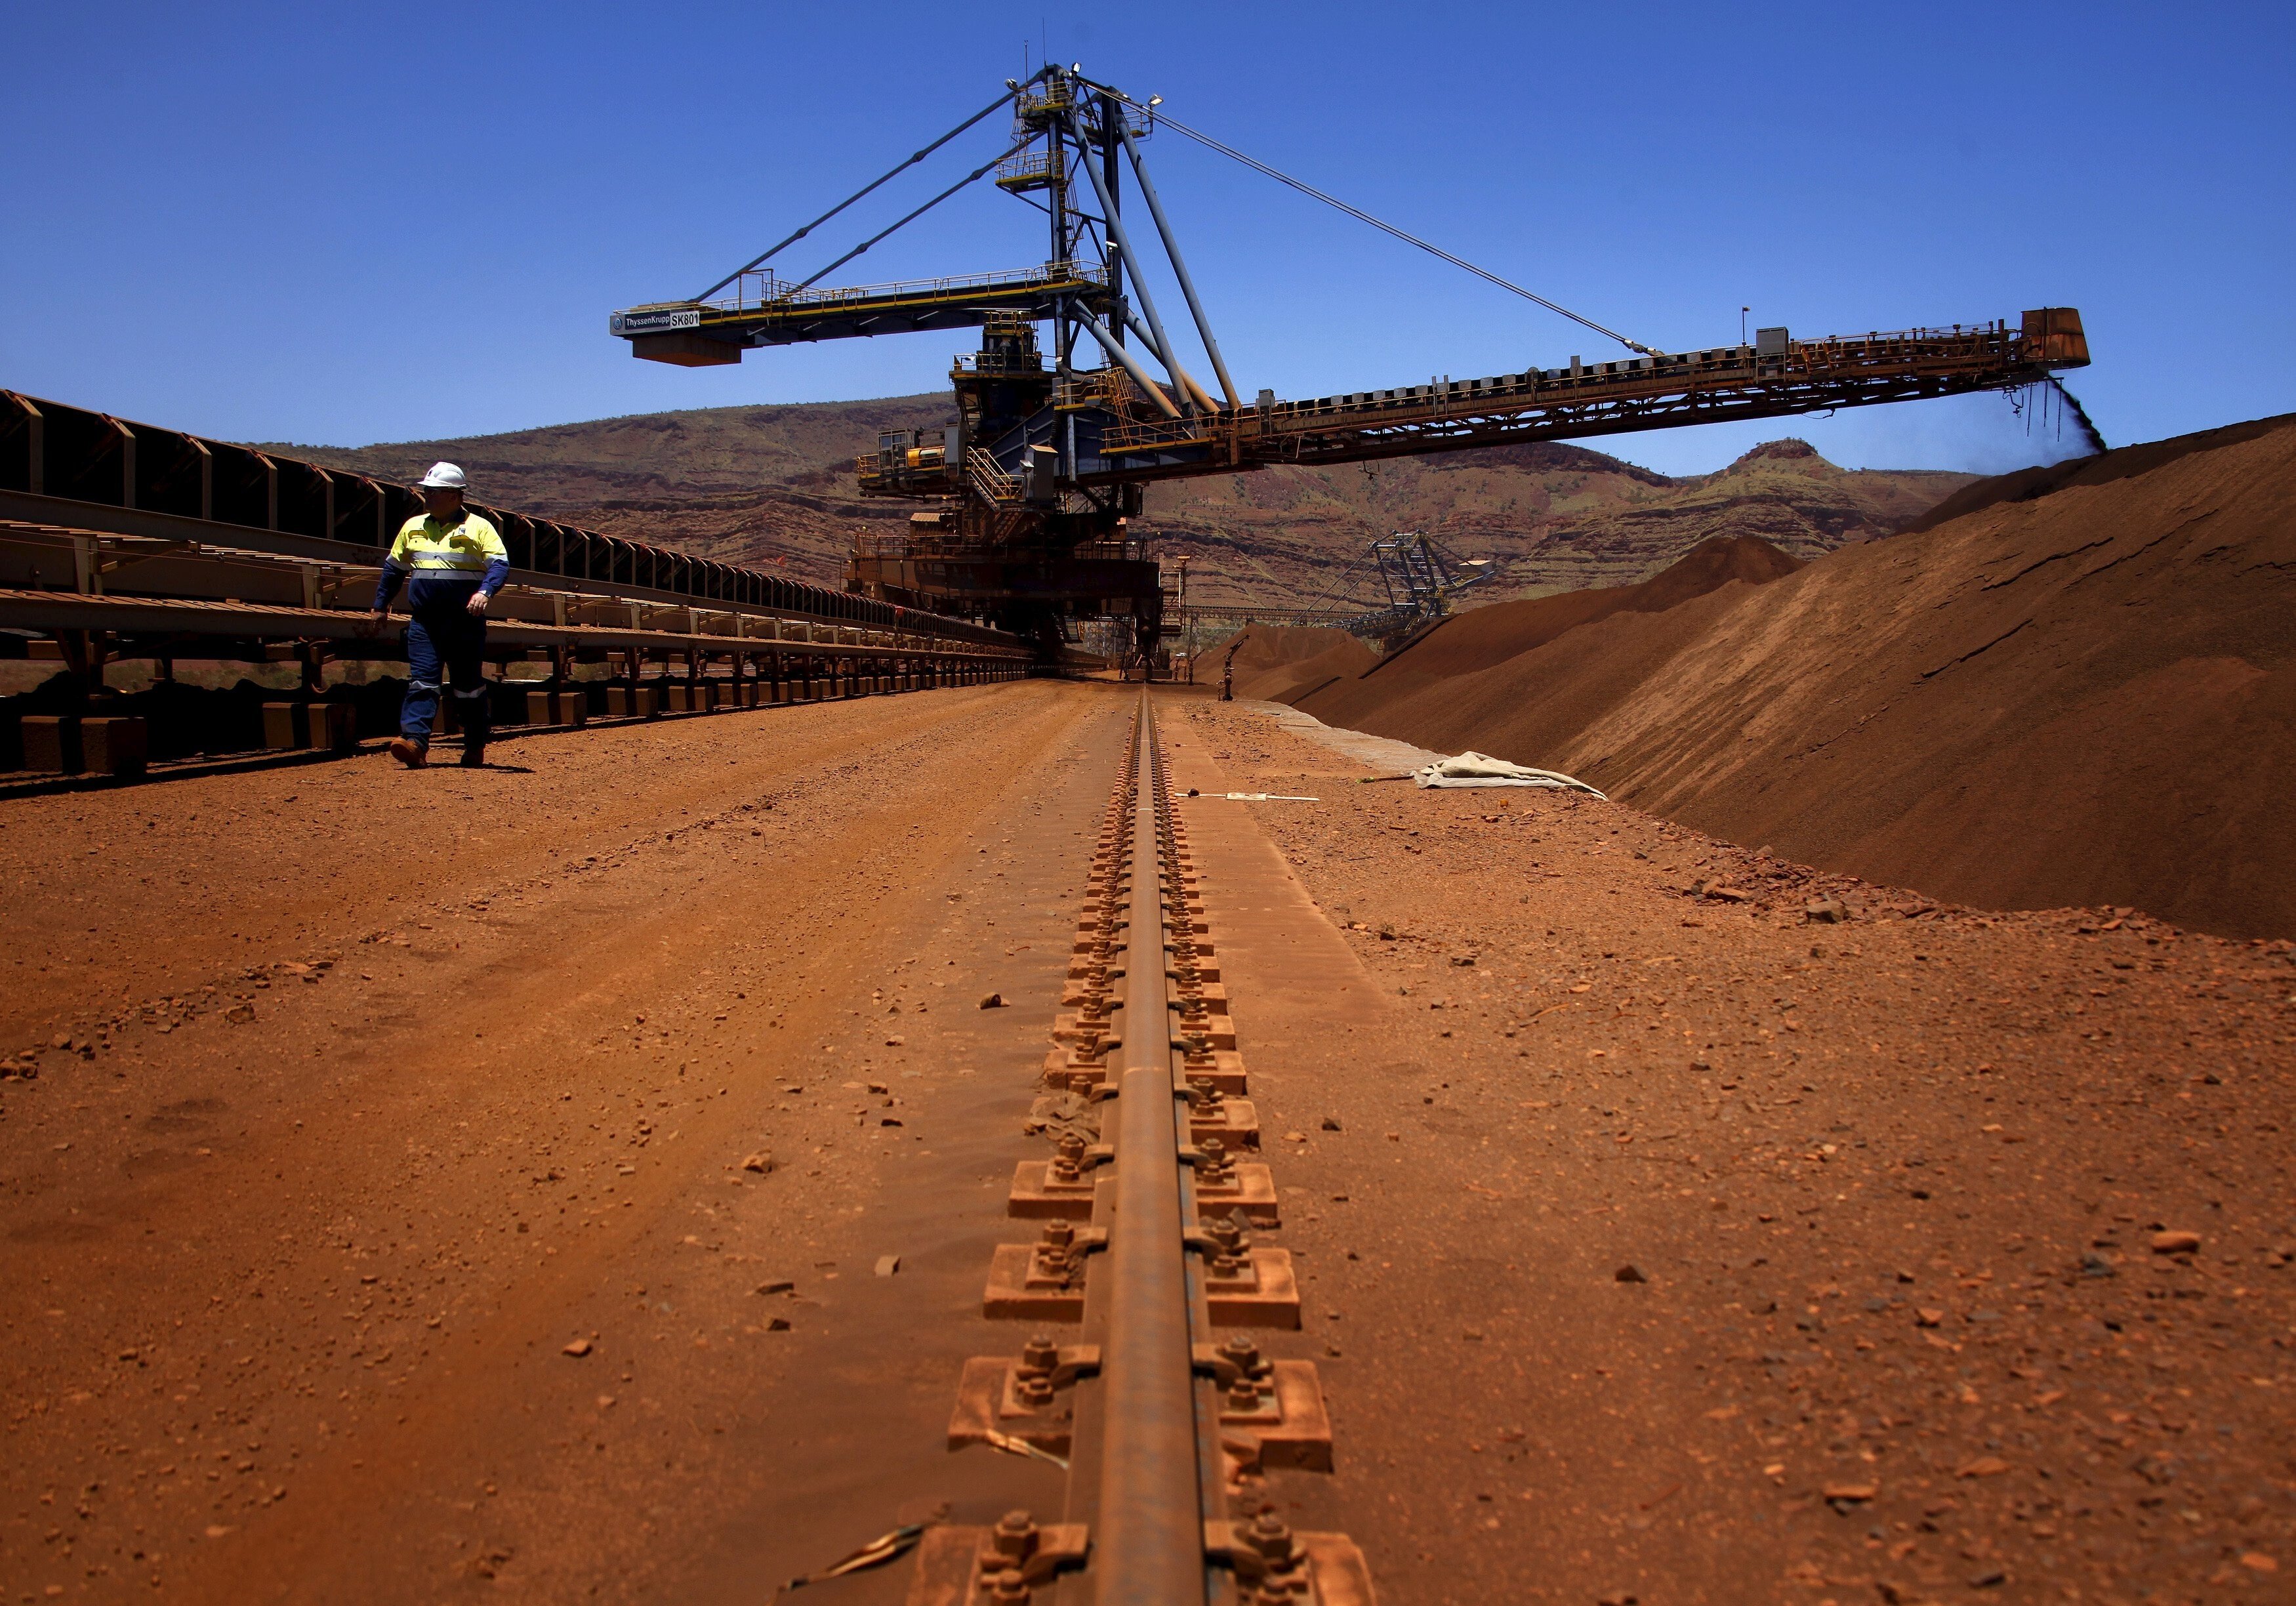 A mine worker inspects conveyor belts transporting iron ore at Fortescue’s Solomon iron ore mine in Sheila Valley, Australia. Photo: Reuters